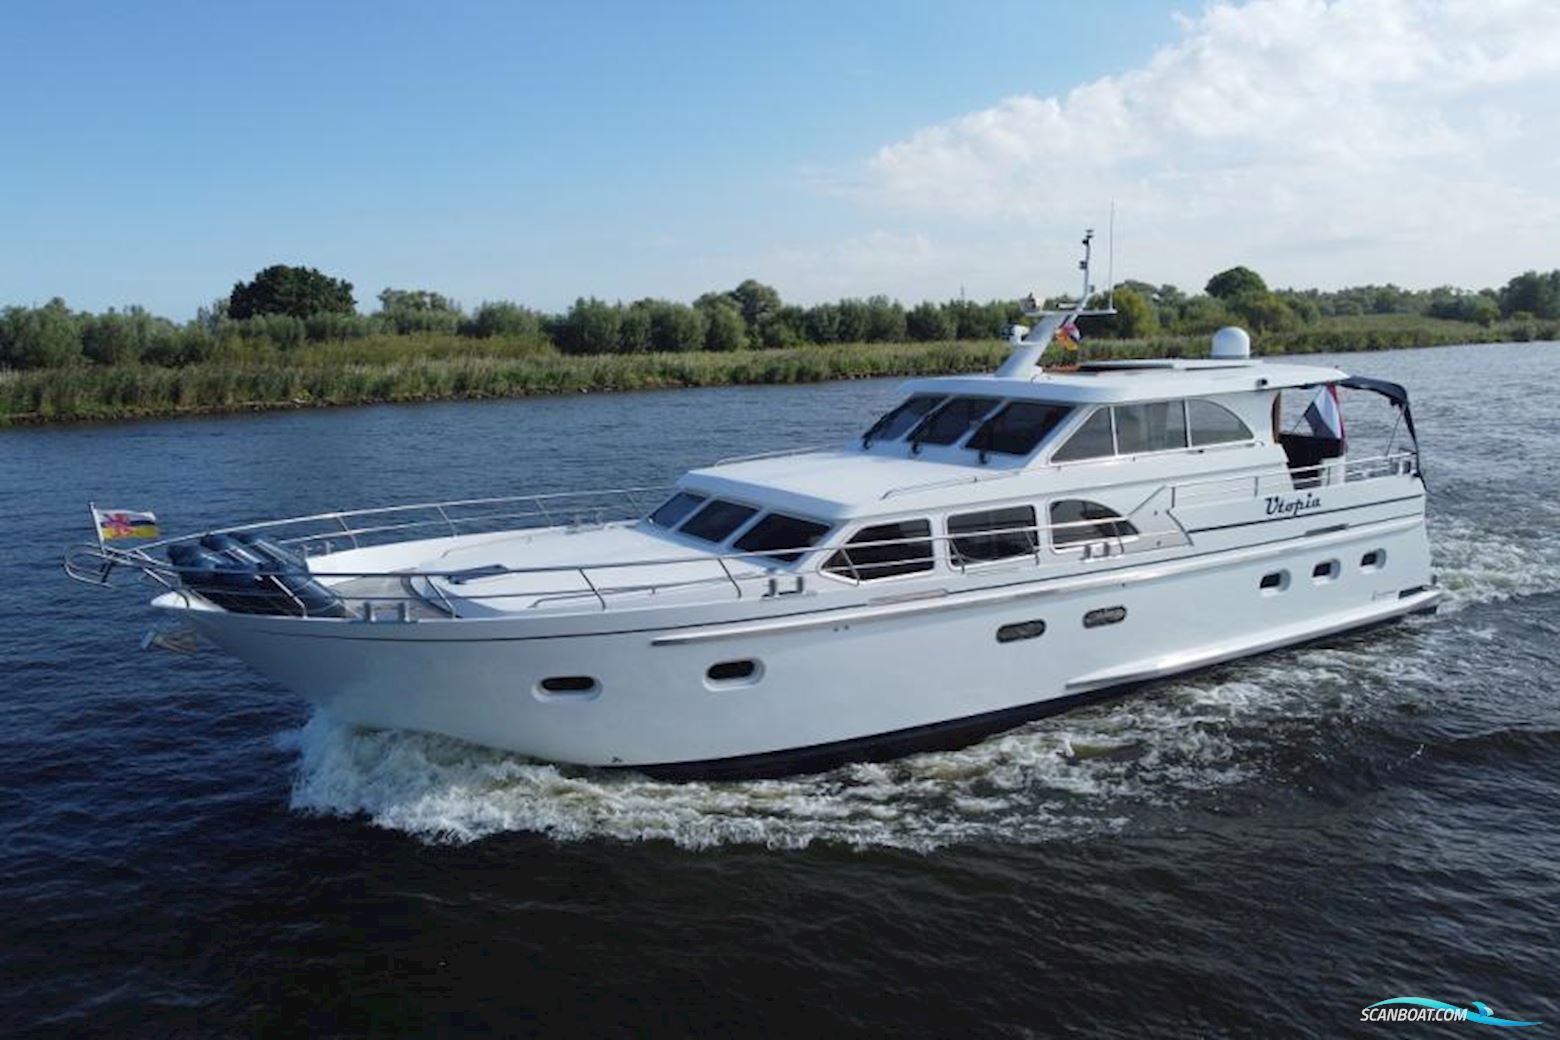 Valk Continental 15.60 Motor boat 2003, with Volvo Penta 235 pk. engine, The Netherlands